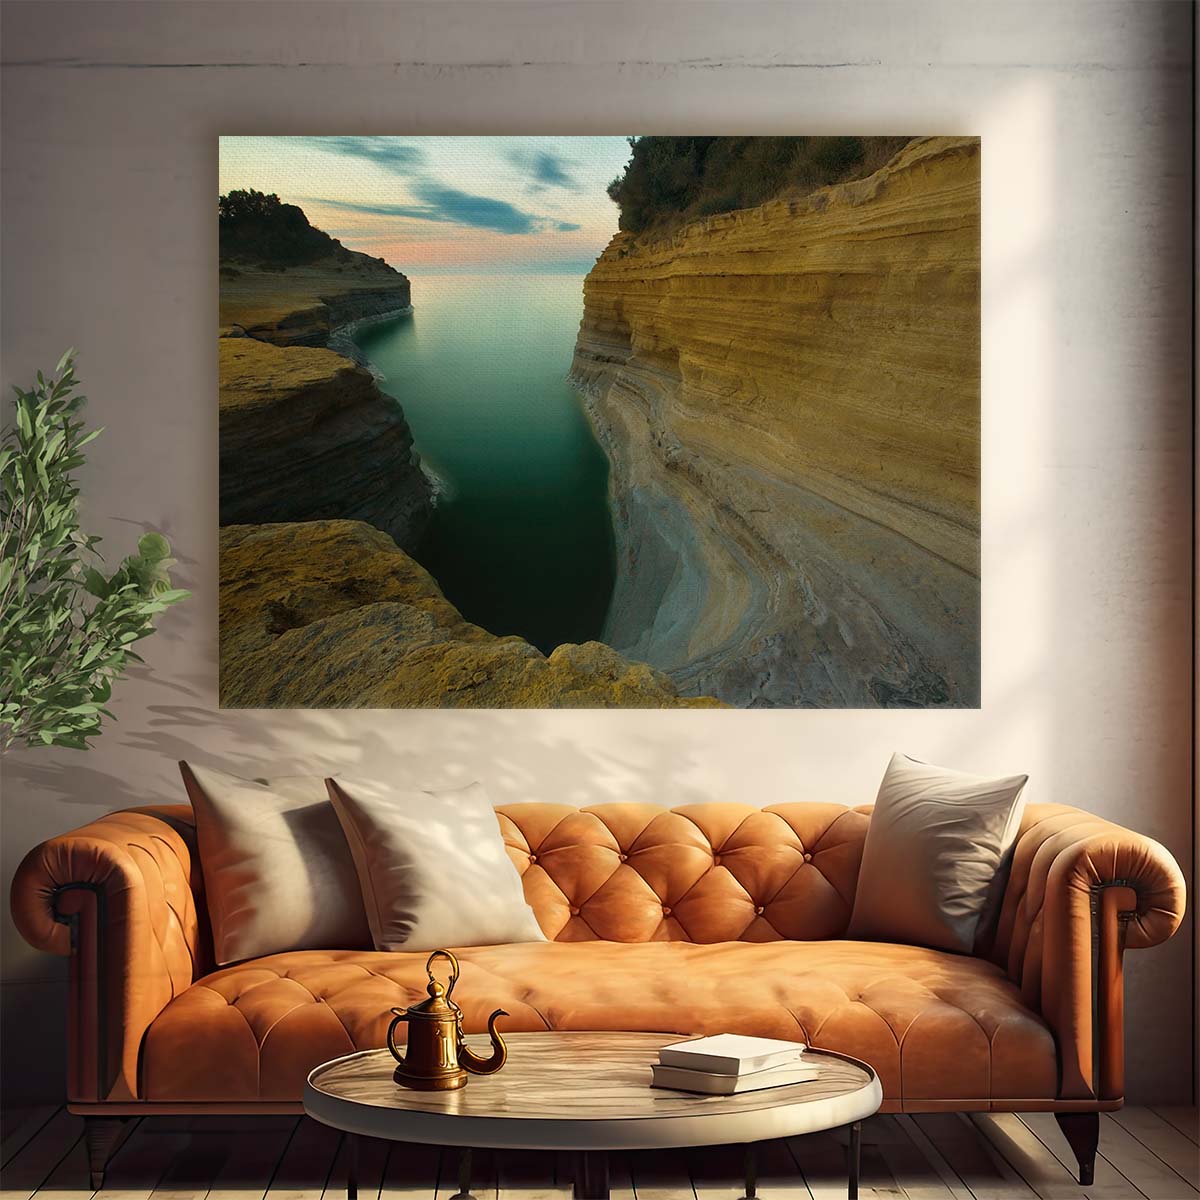 Corfu's Canal D'Amour Coastal Seascape Wall Art by Luxuriance Designs. Made in USA.